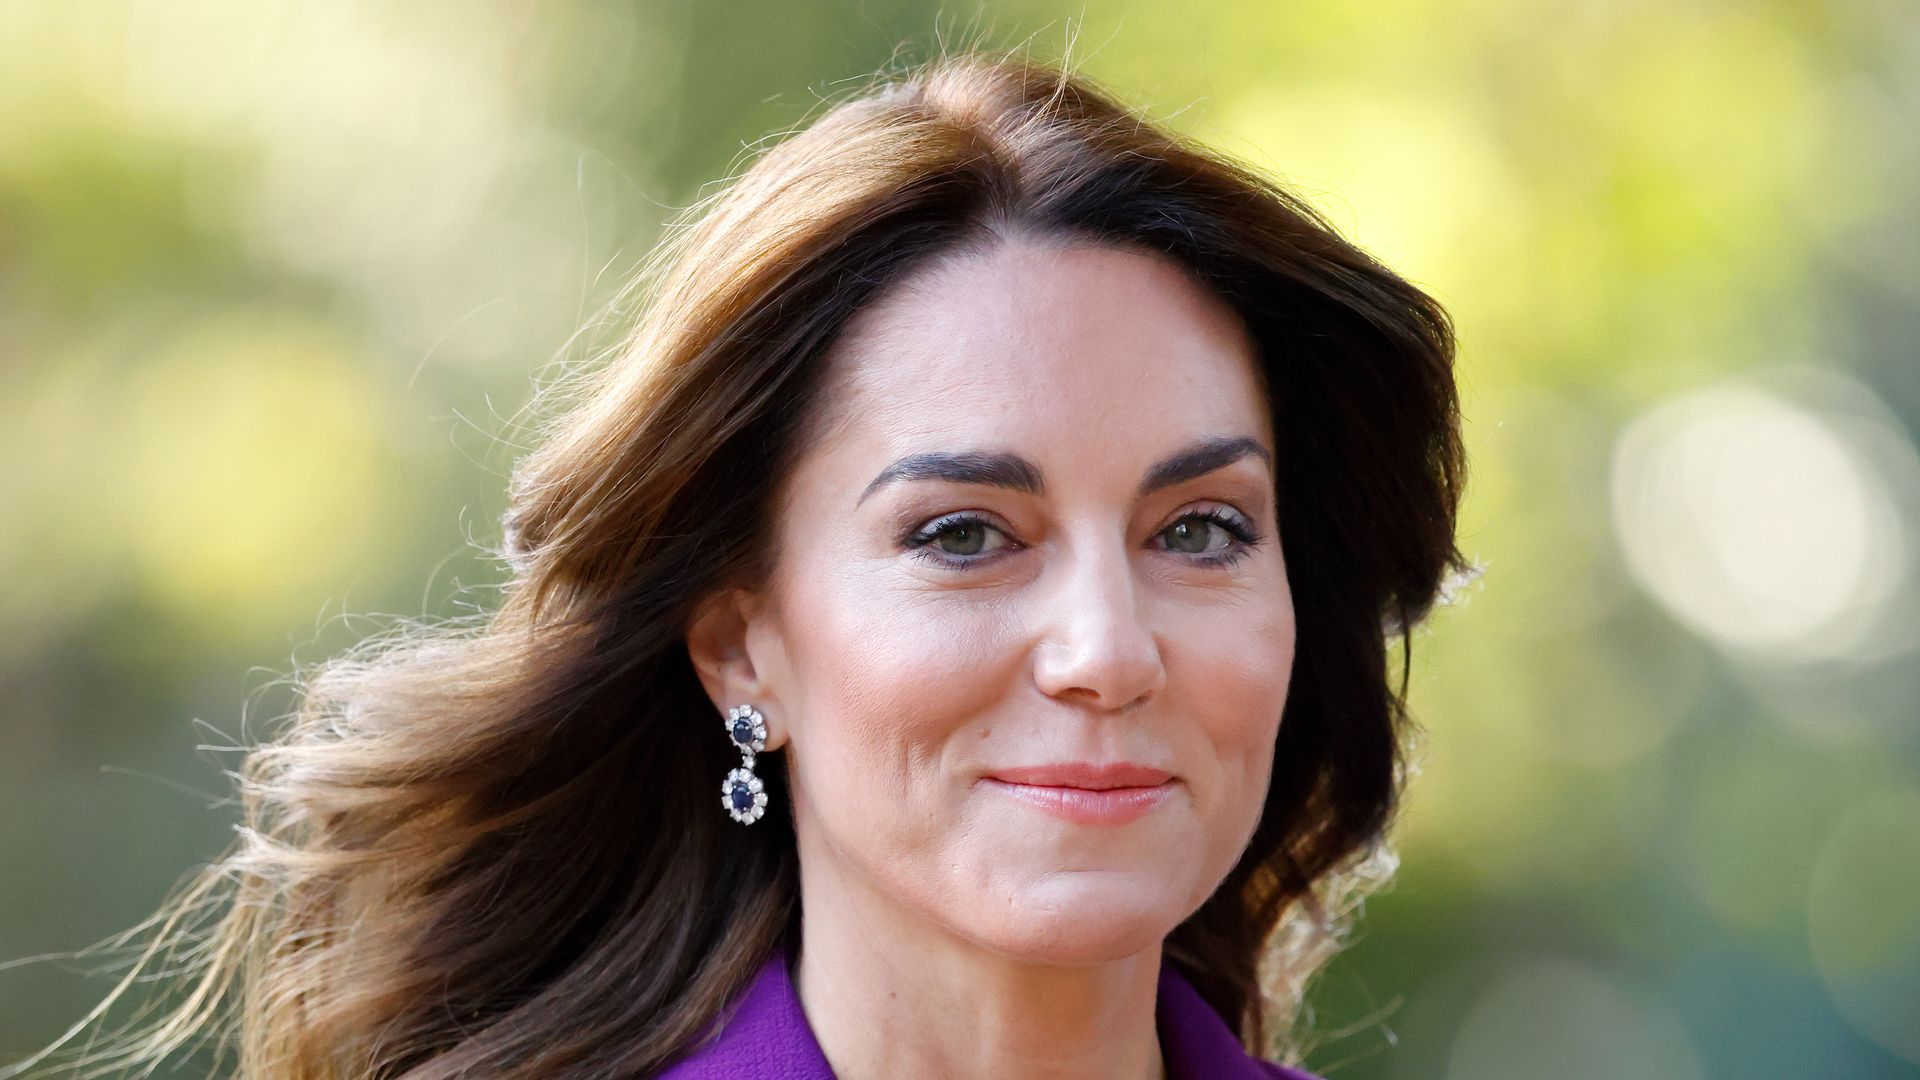 Princess Kate extremely moved from public reaction to cancer diagnosis